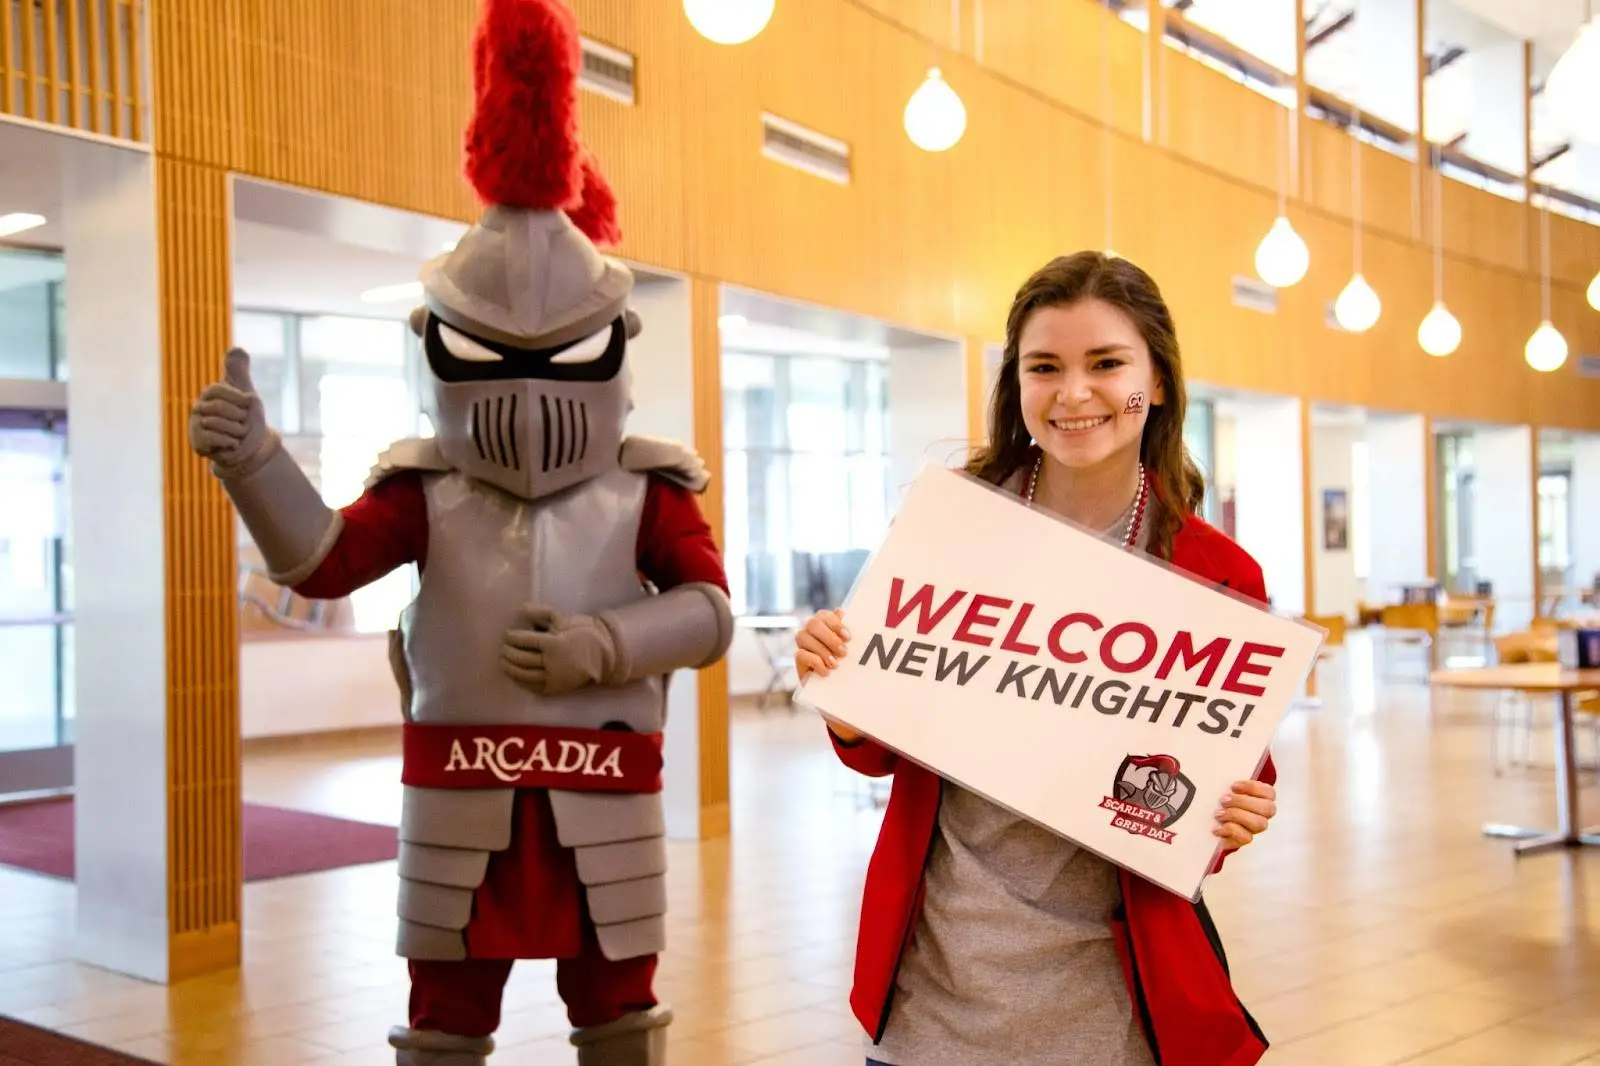 Arcadia Knight mascot and smiling student great new students with Welcome New Knights sign.